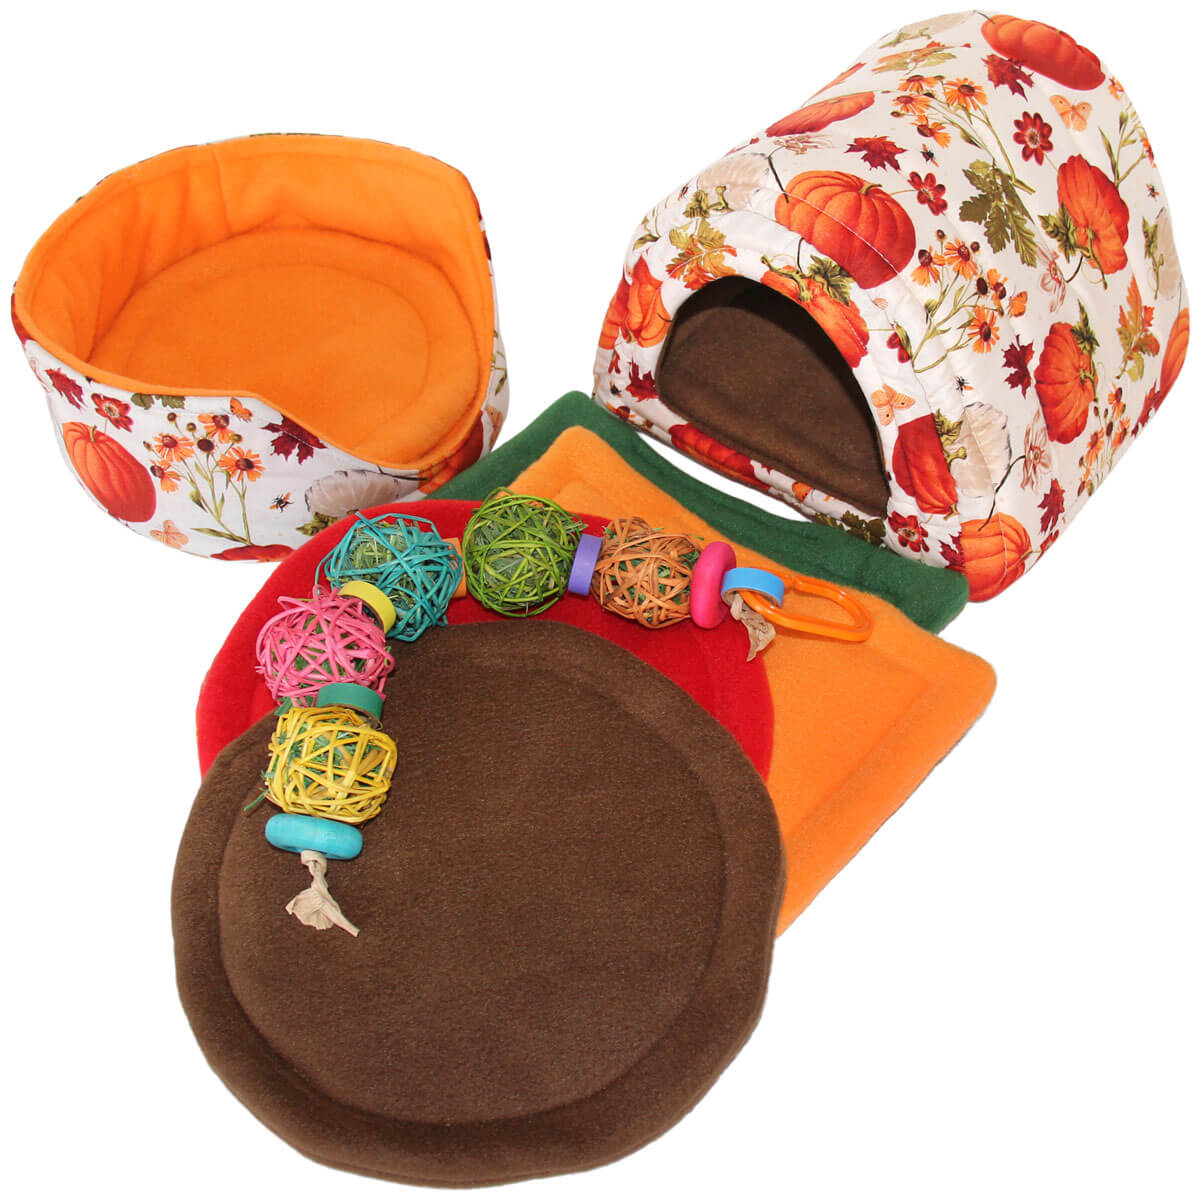 Large Pumpkin Harvest Cozy and Toy Bundle for Guinea Pigs and Other Small Animals